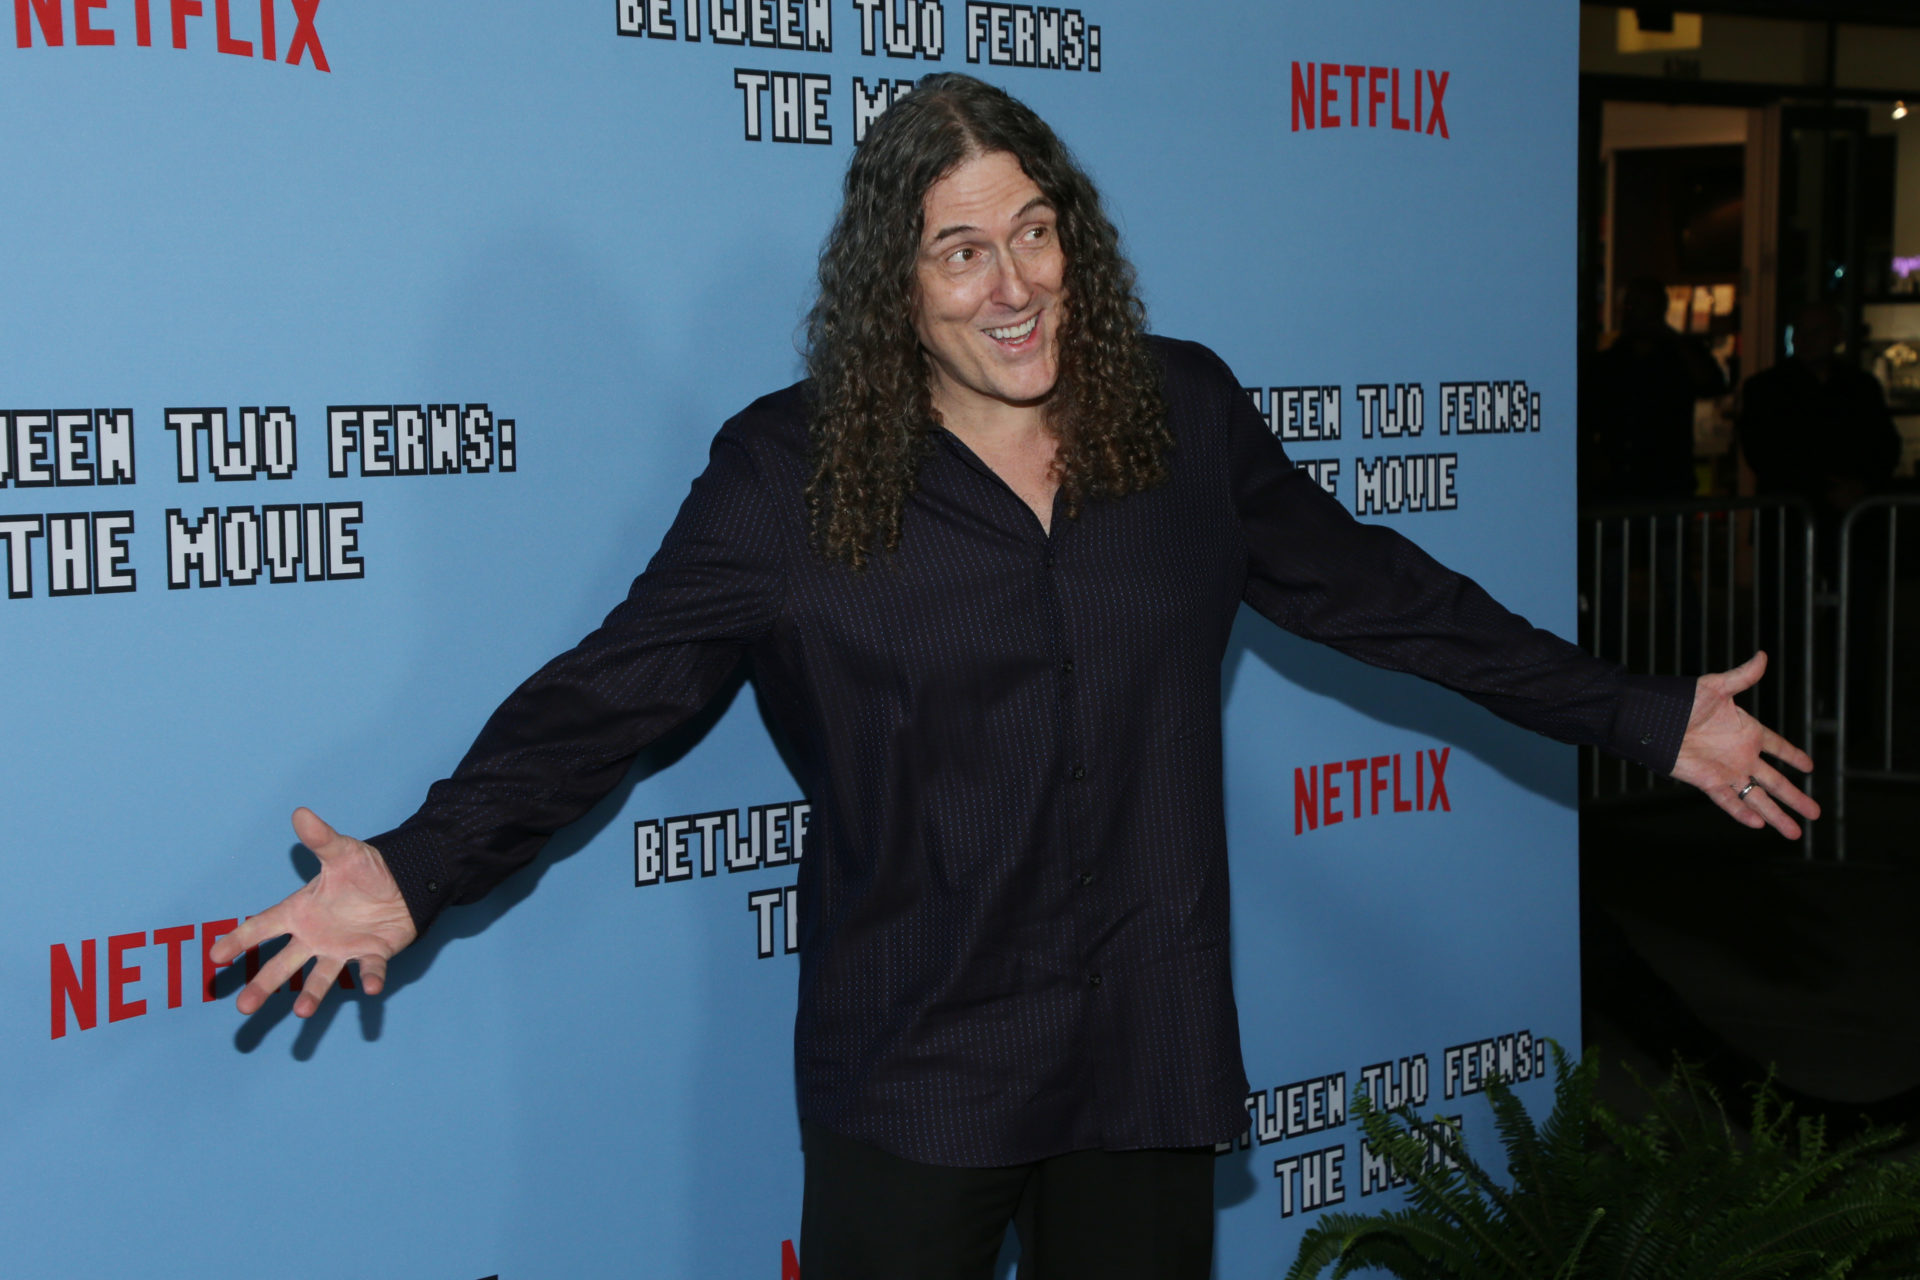 LA Premiere Of Netflix's "Between Two Ferns: The Movie" - Arrivals